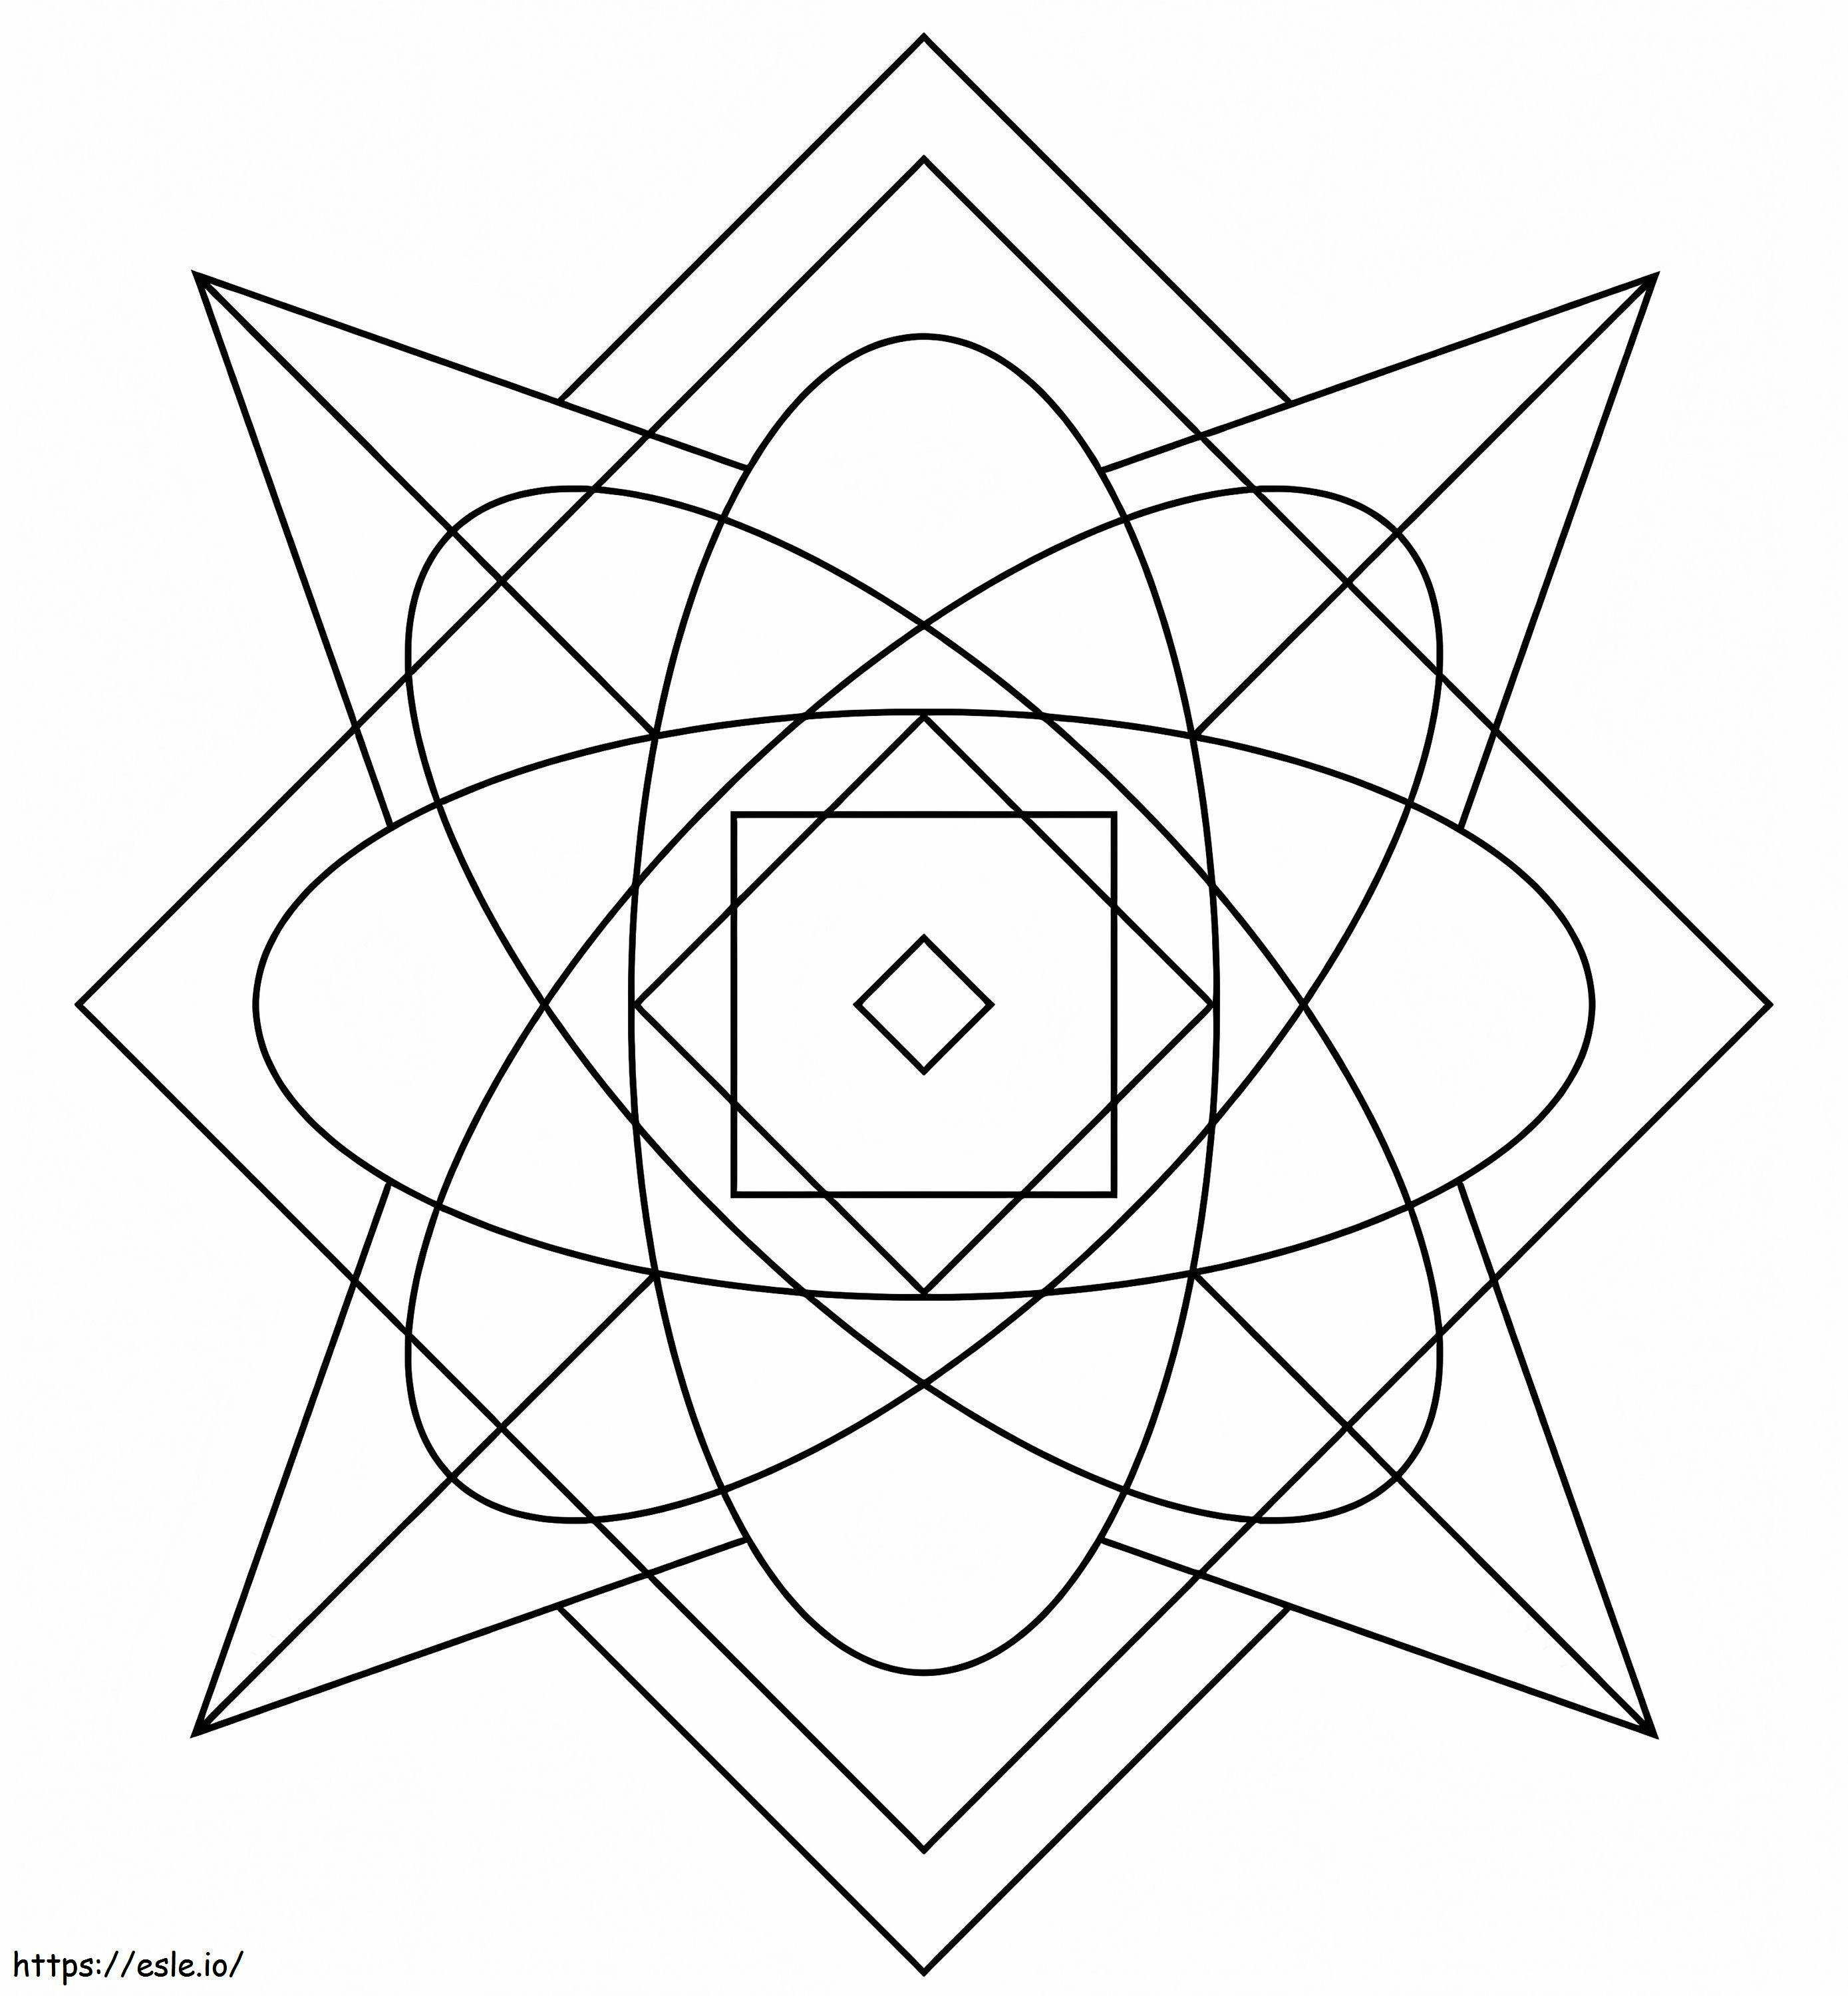 Kaleidoscope 17 coloring page